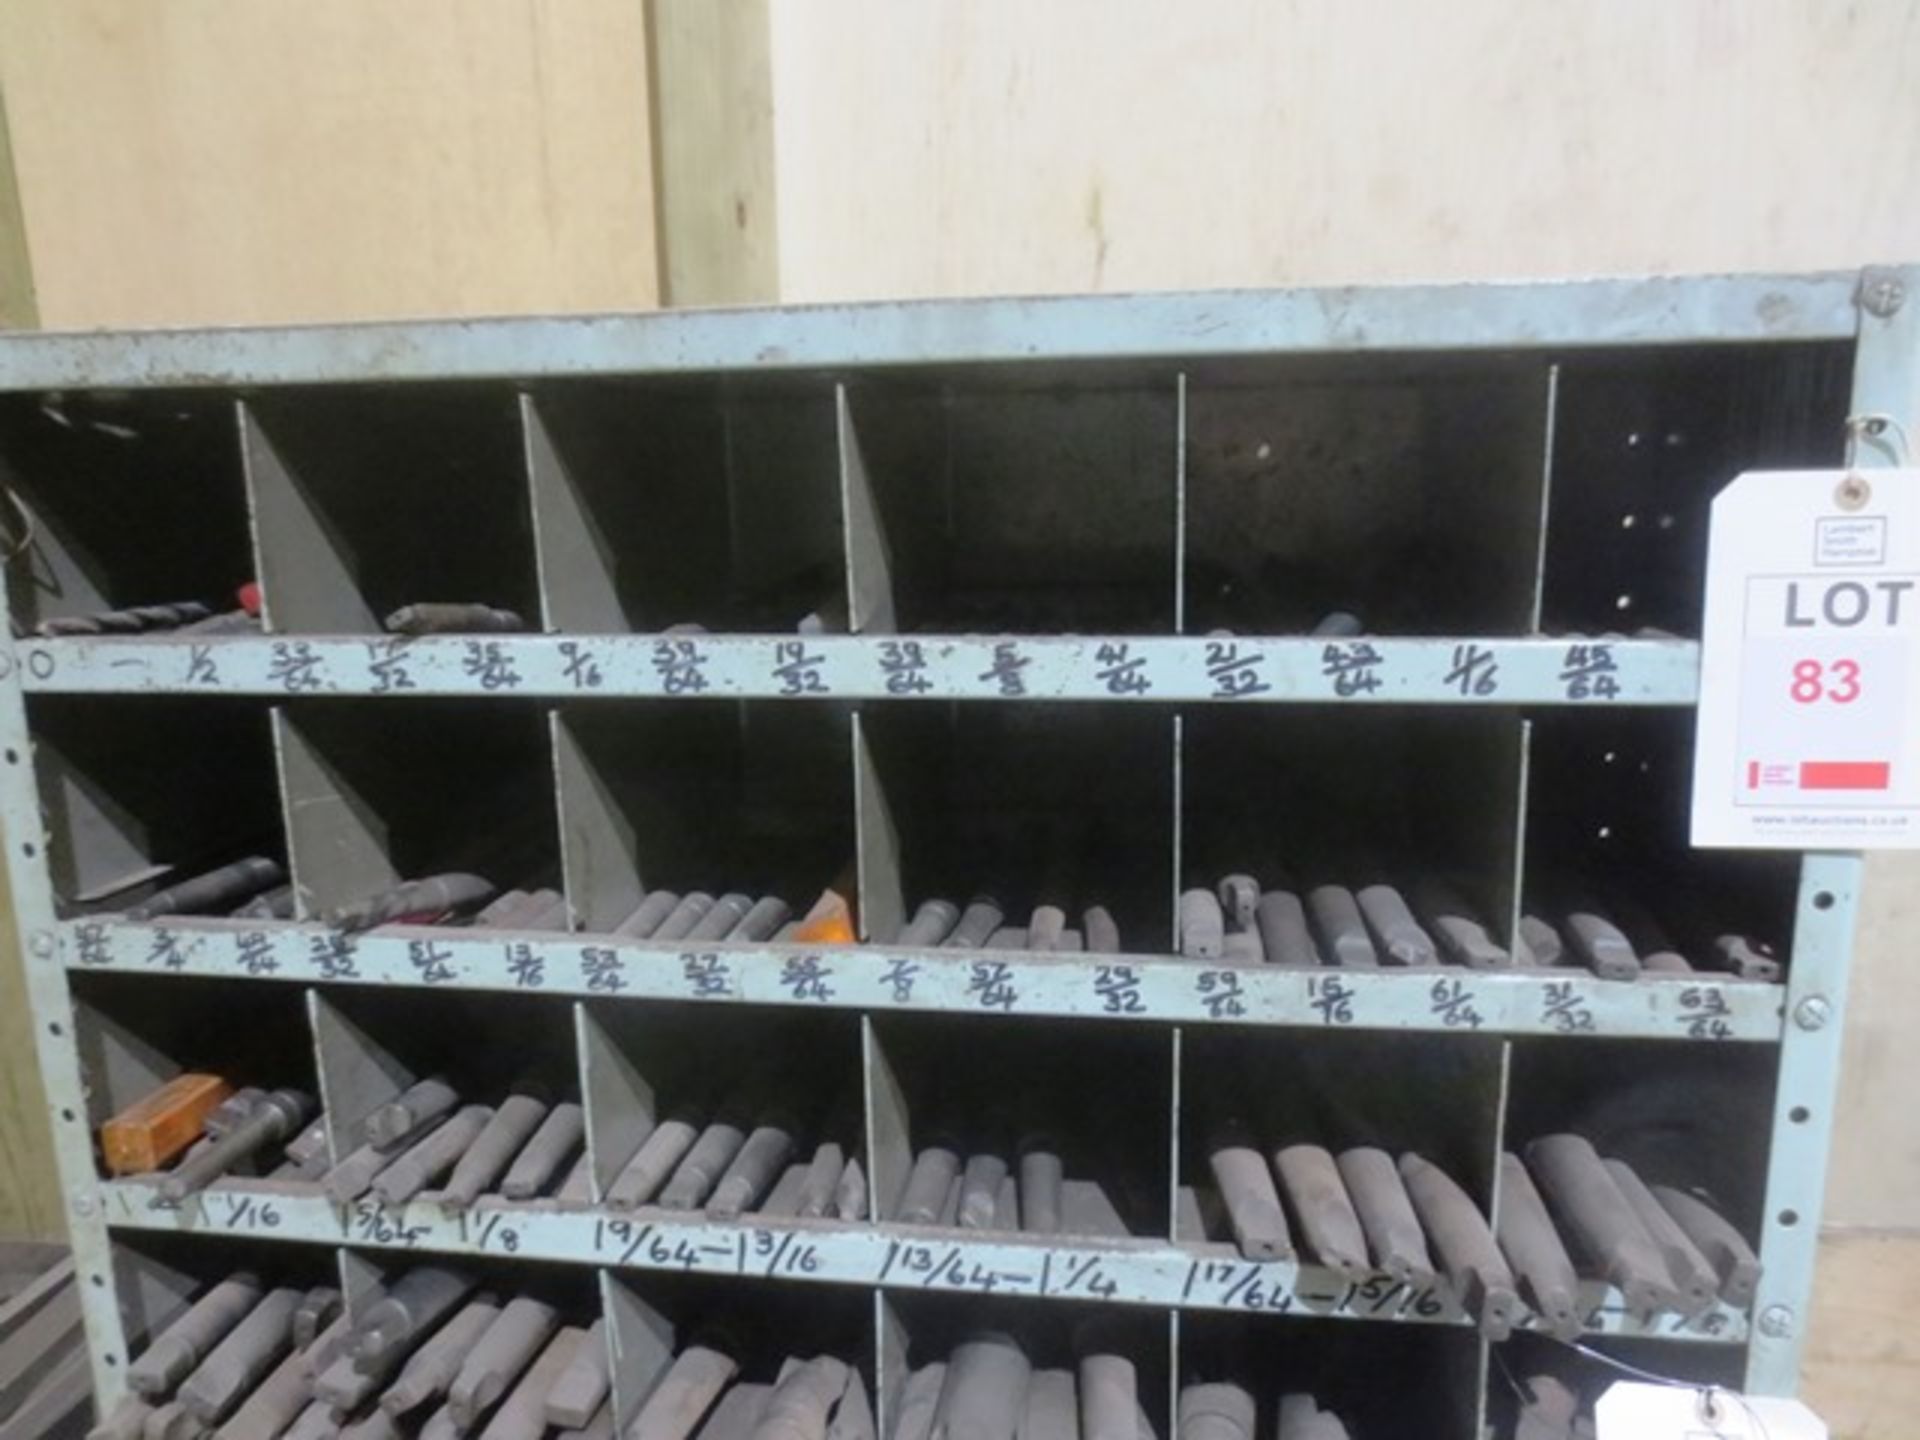 Contents of three shelves including various slot drills (0 - 13/8")